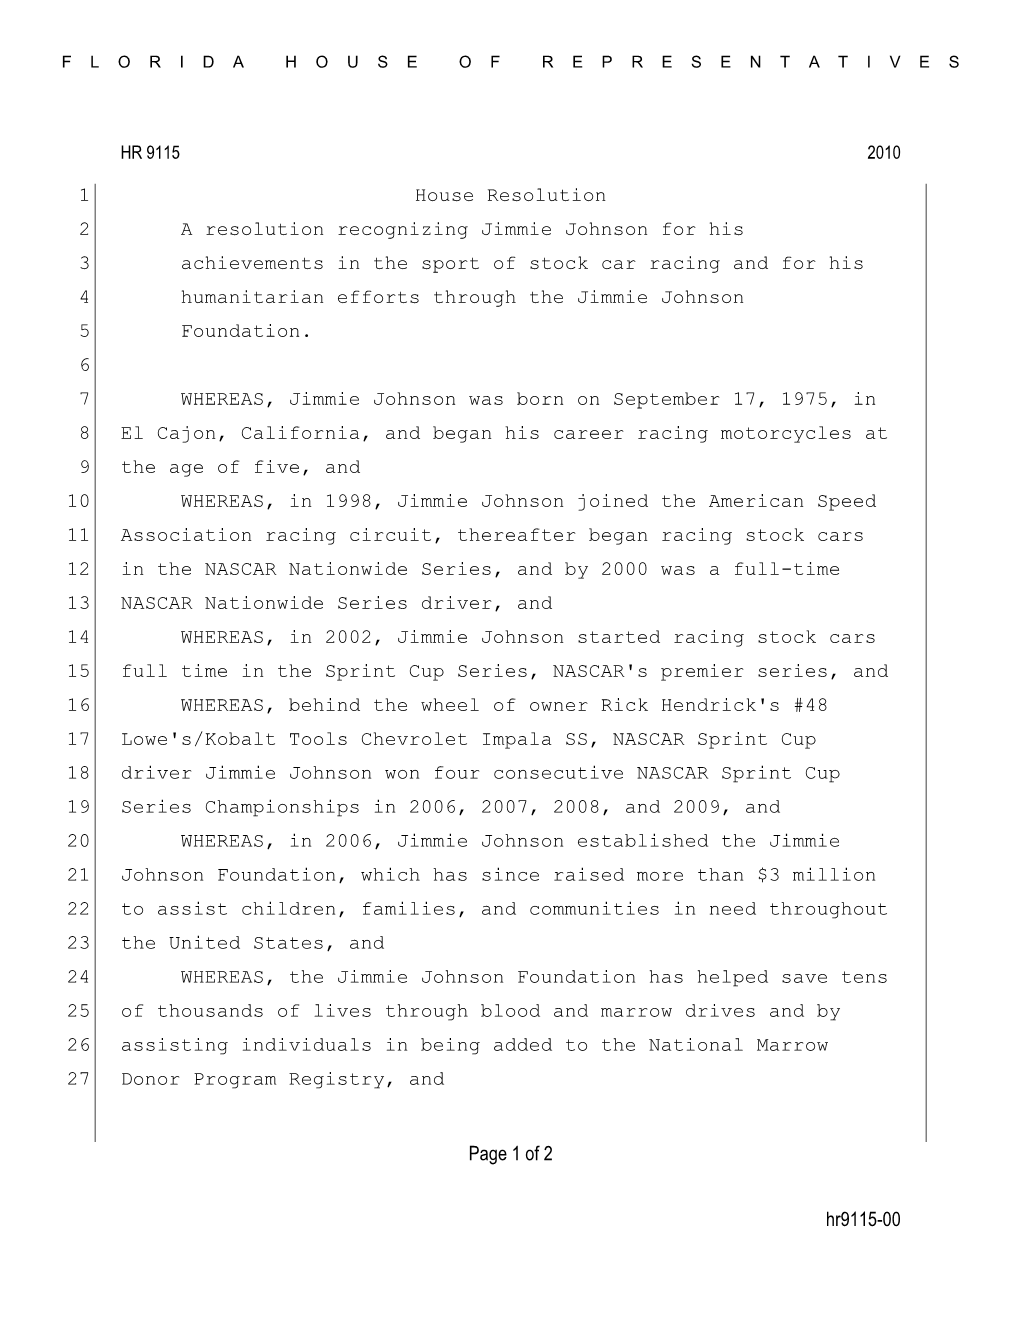 Hr9115-00 Page 1 of 2 House Resolution 1 A